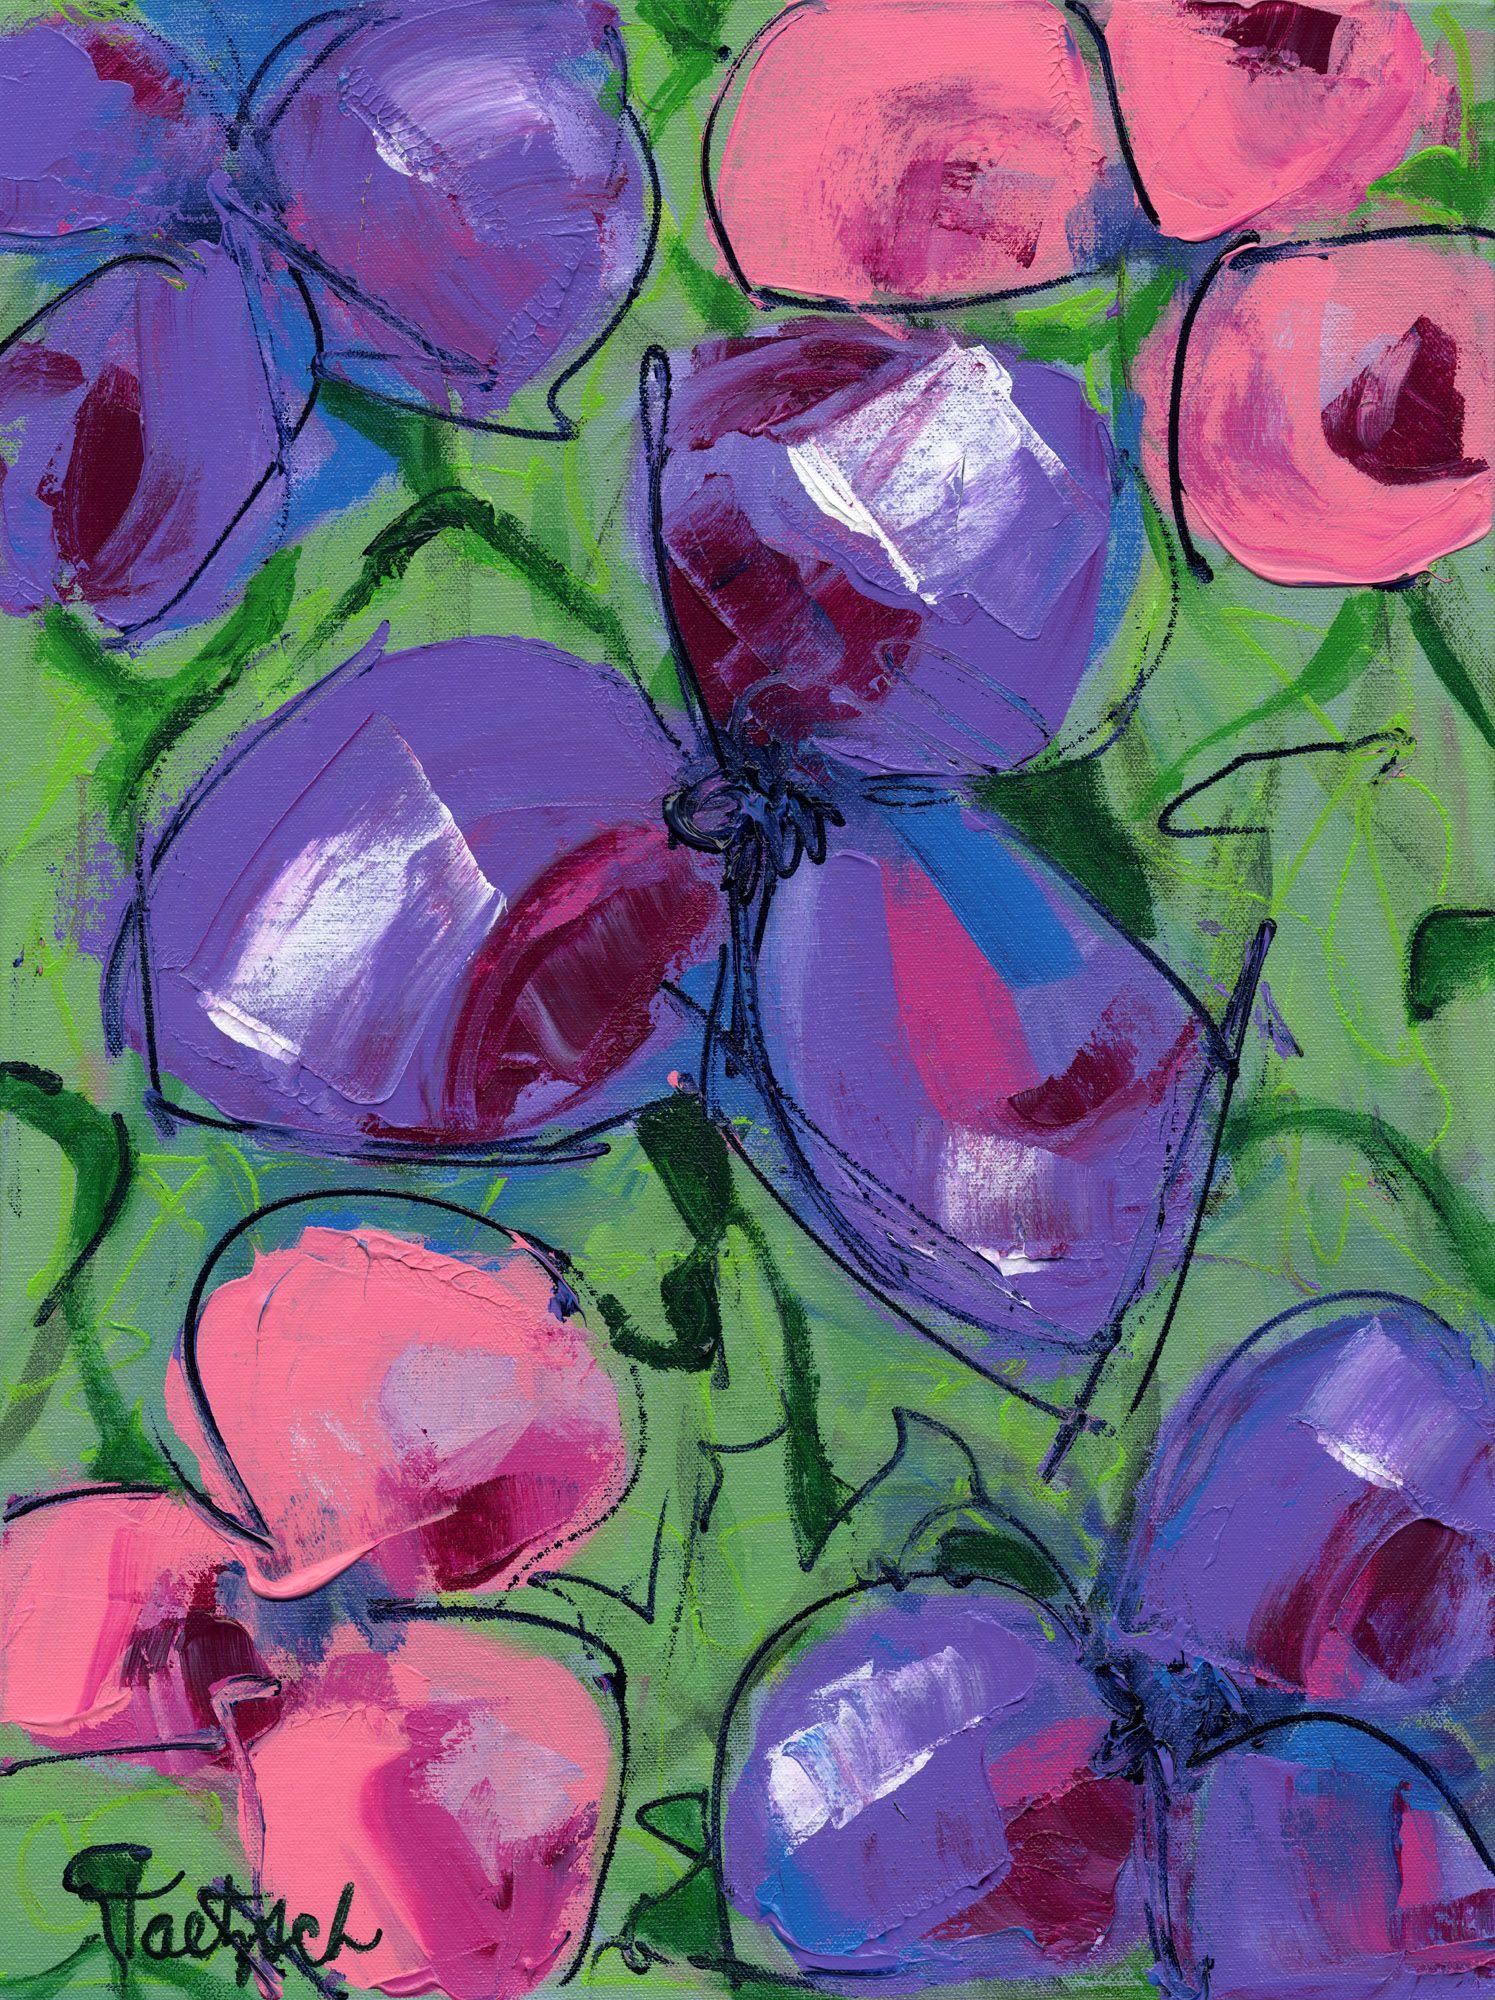 18" x 24" x 1.5" original painting on stretched canvas, with the image continuing around the sides so that no frame is required.  It comes with picture wire ready to hang.     In this floral painting, I delighted in the variations of pink and purple